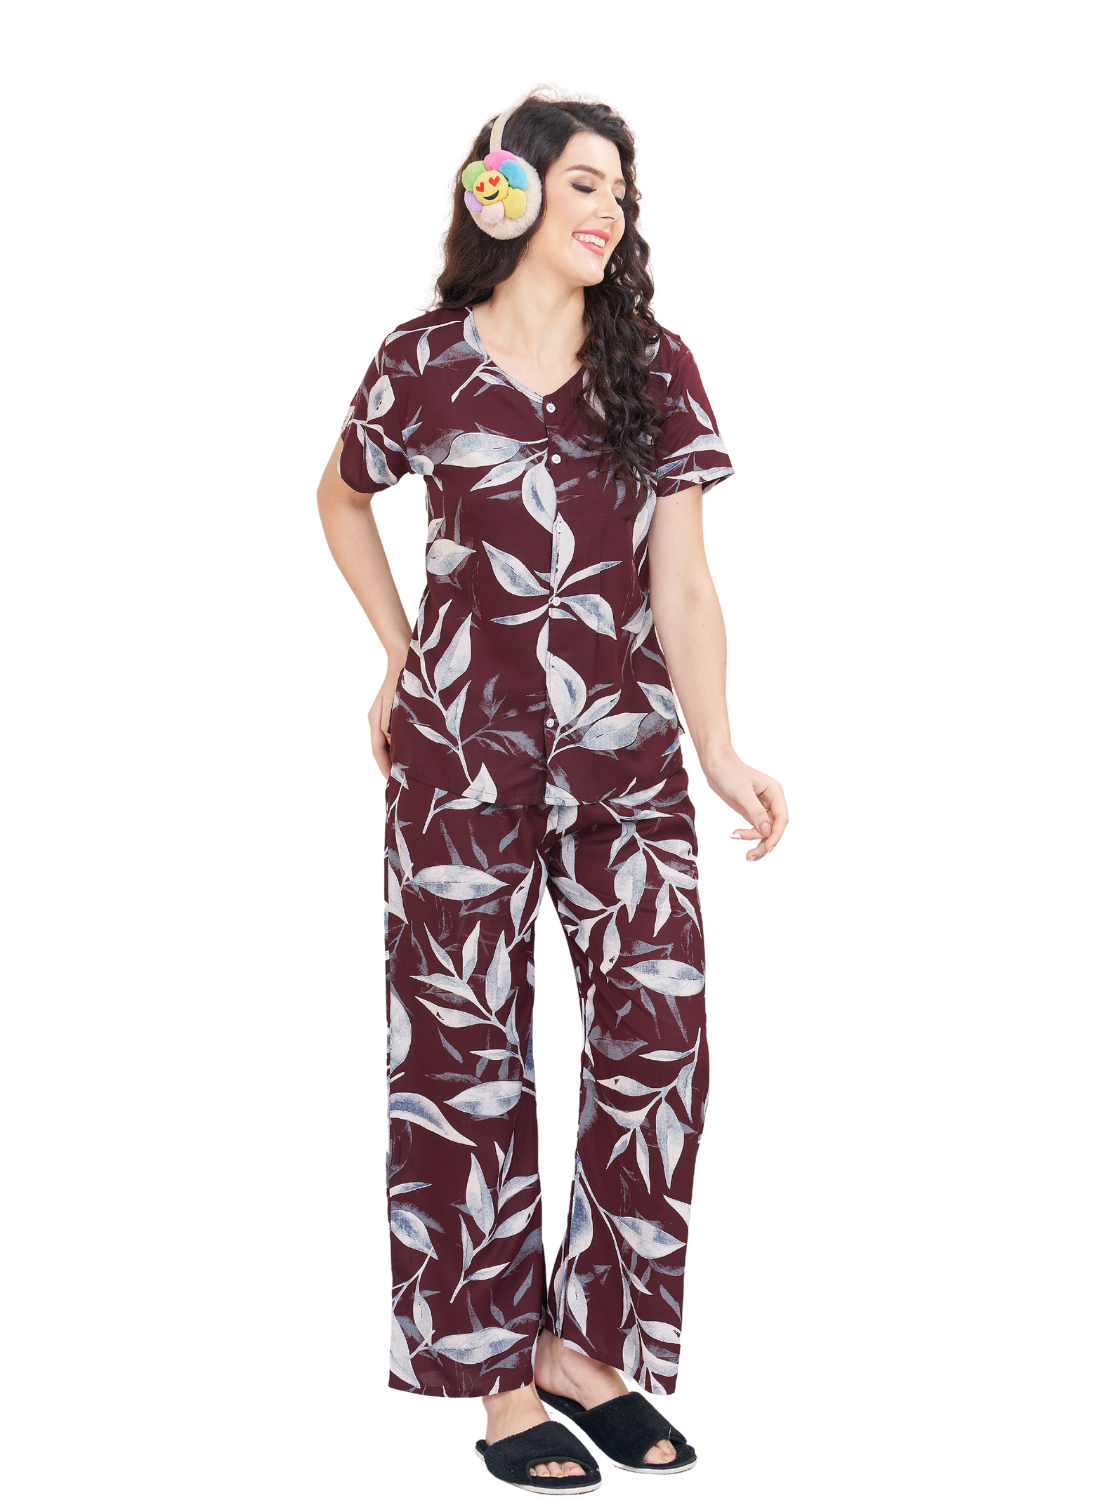 New ONLY MINE Rayon Printed Top & Bottom Set Night Suits- Stylish Printed Top & Bottom Set for Trendy Women's